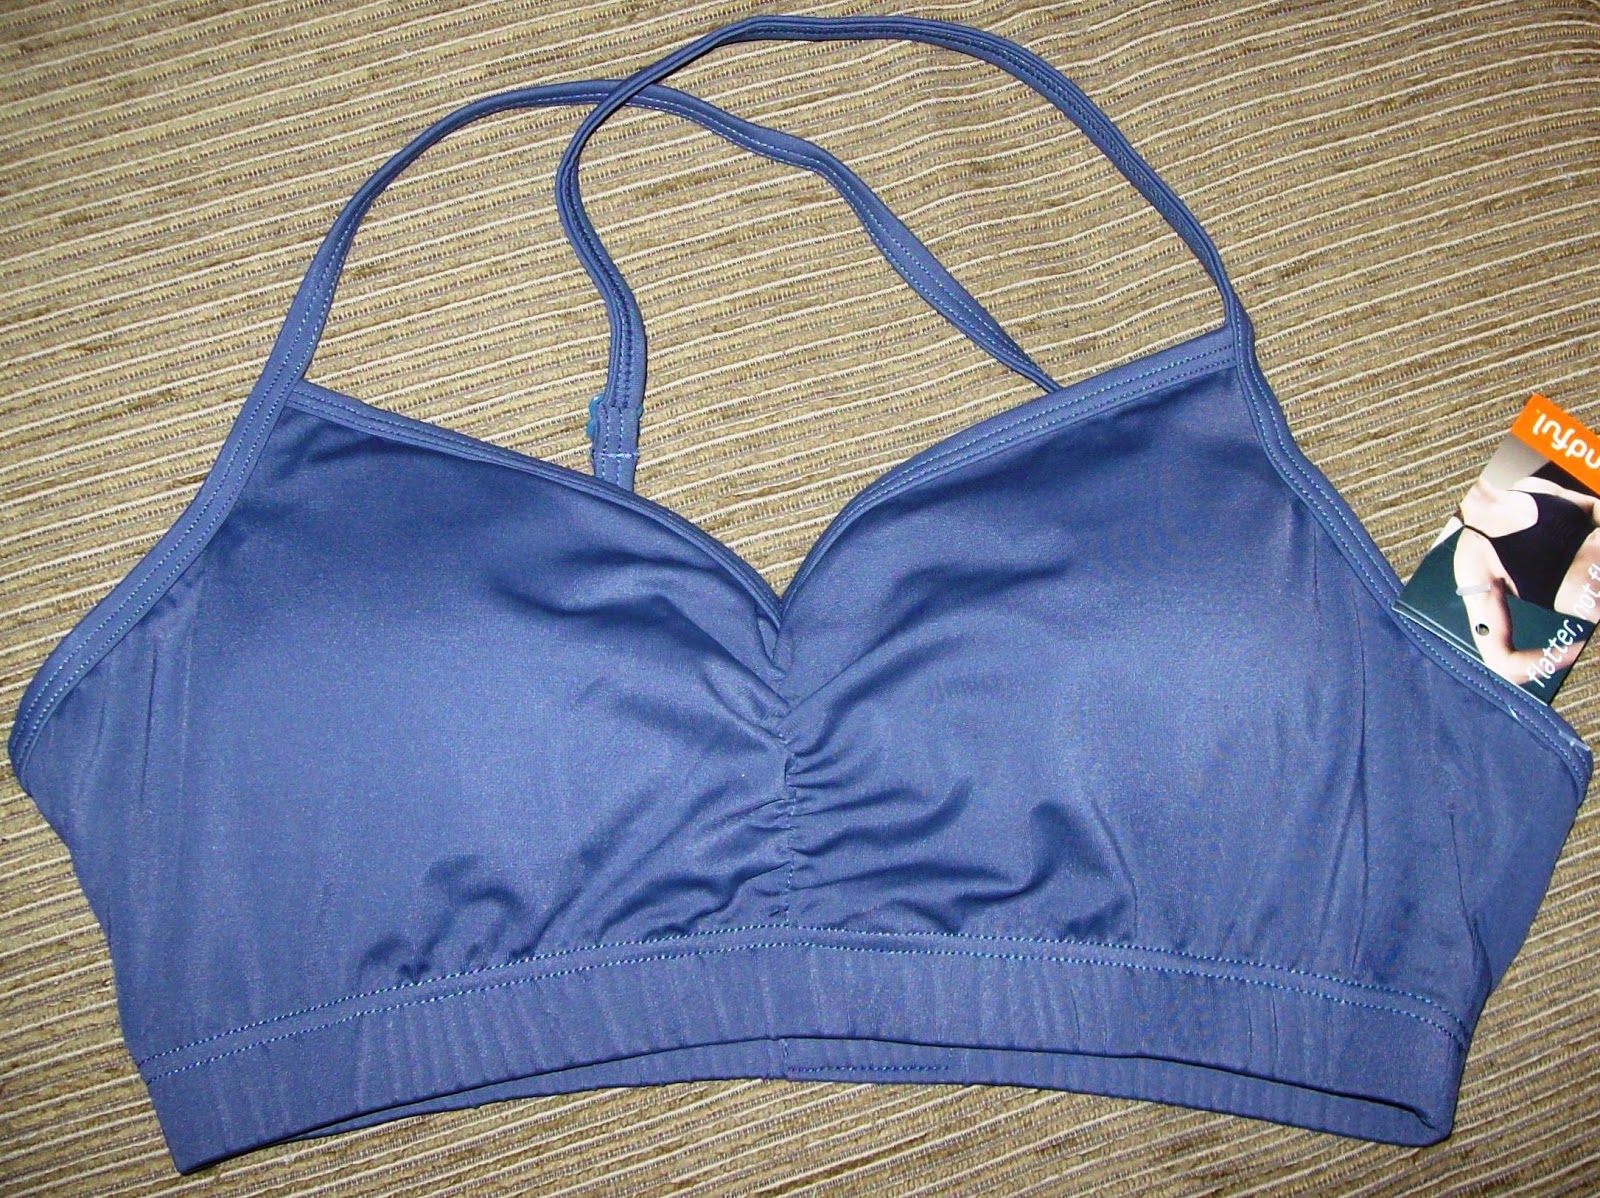 Handful Bra Review  The Nutritionist Reviews